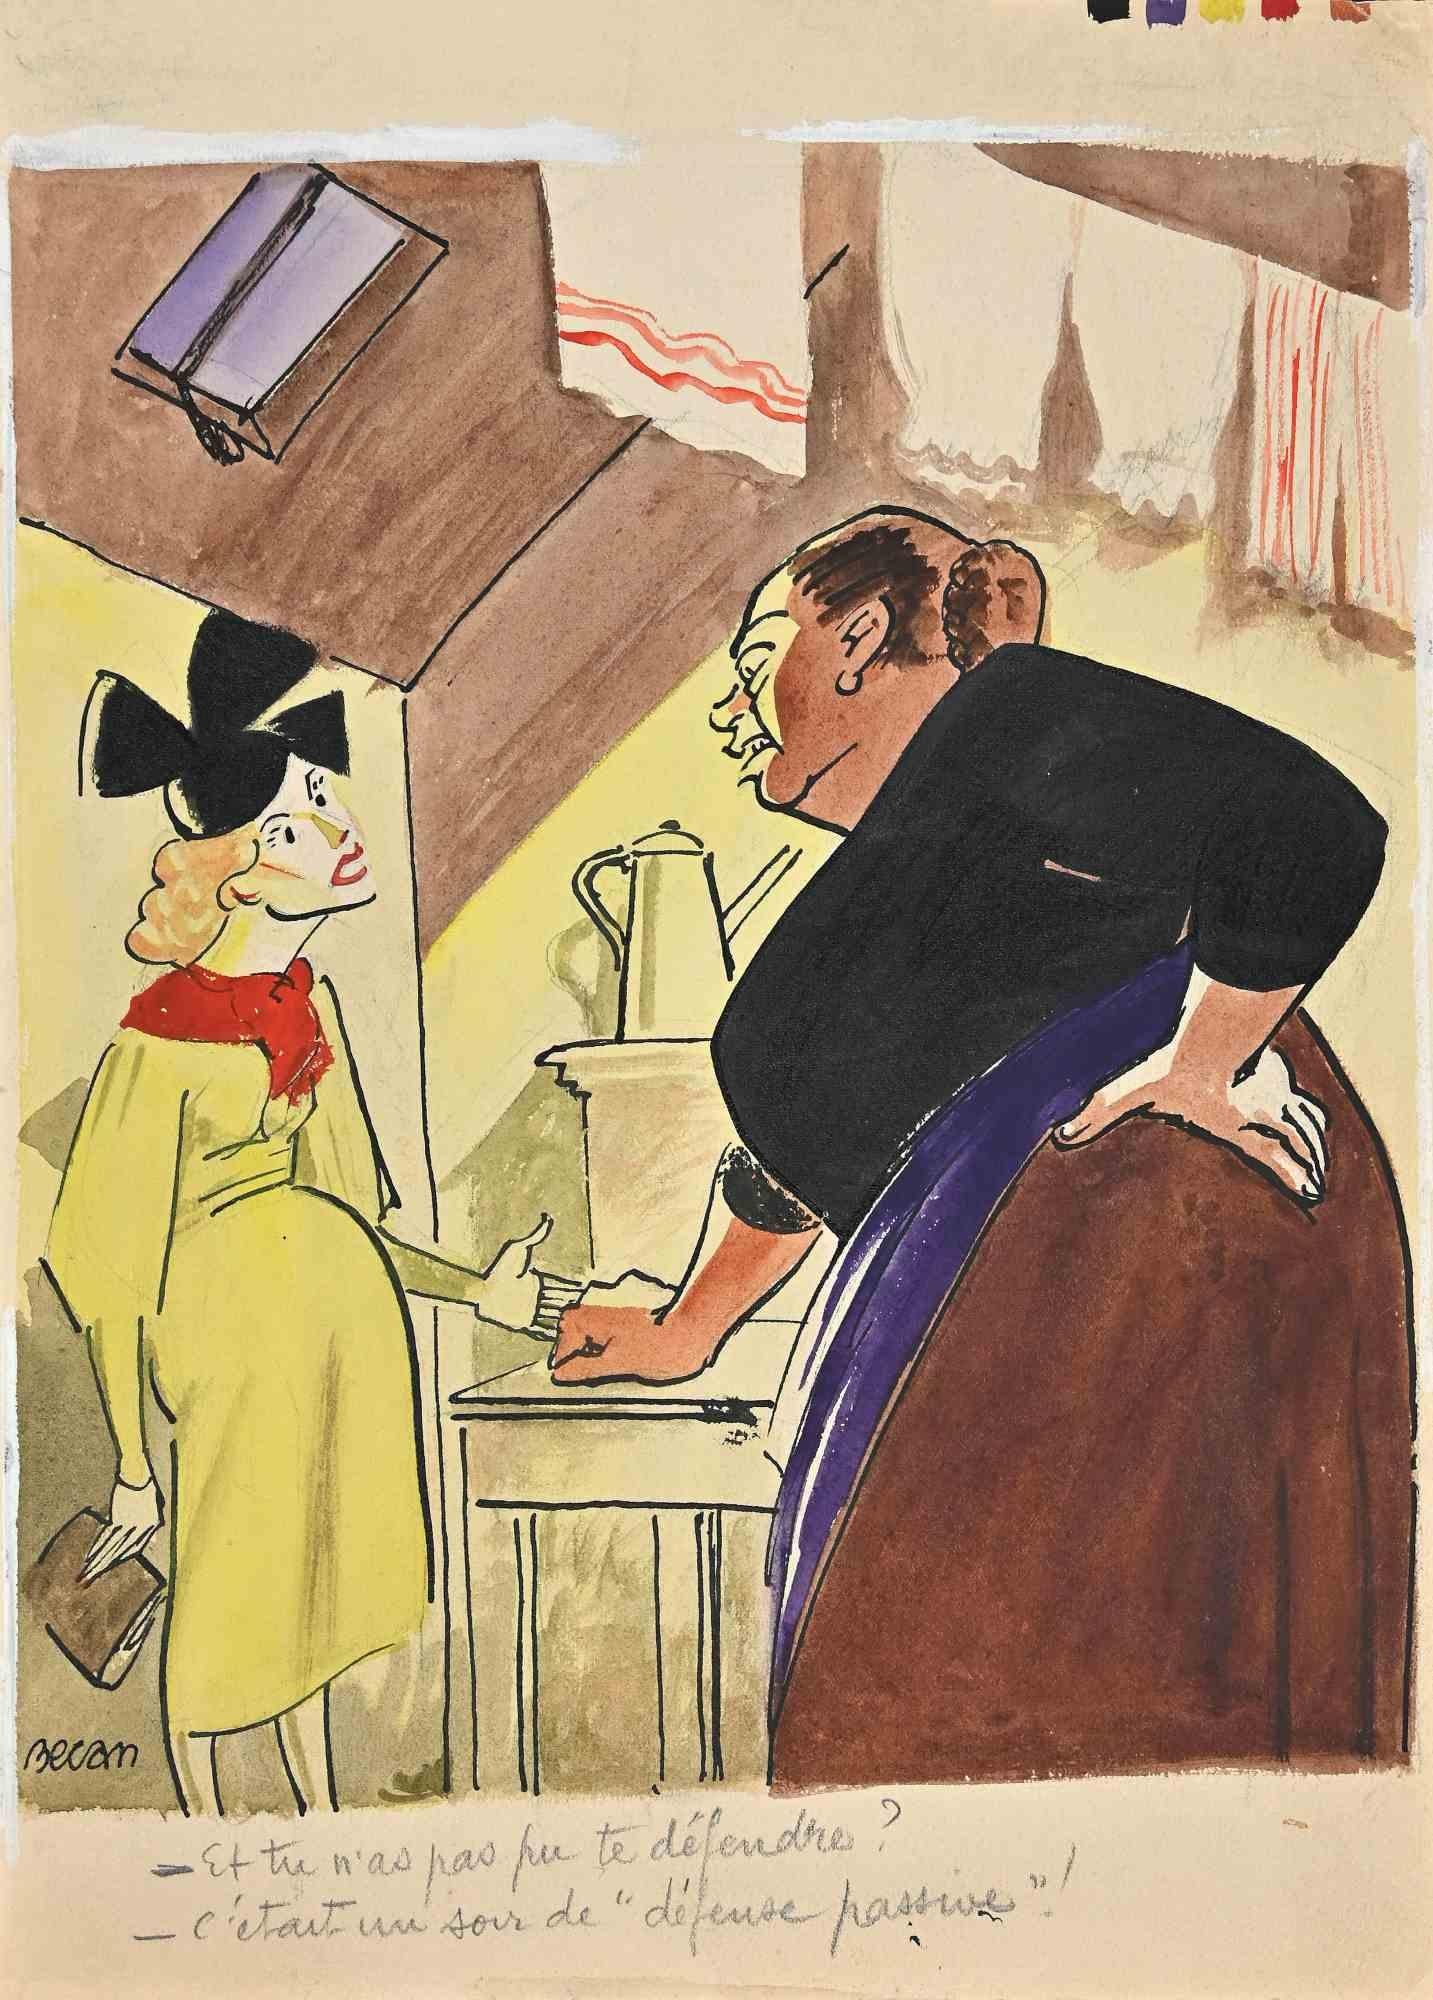 The Conversation of Two Women - Drawing by Bernard Bécan - 1920s